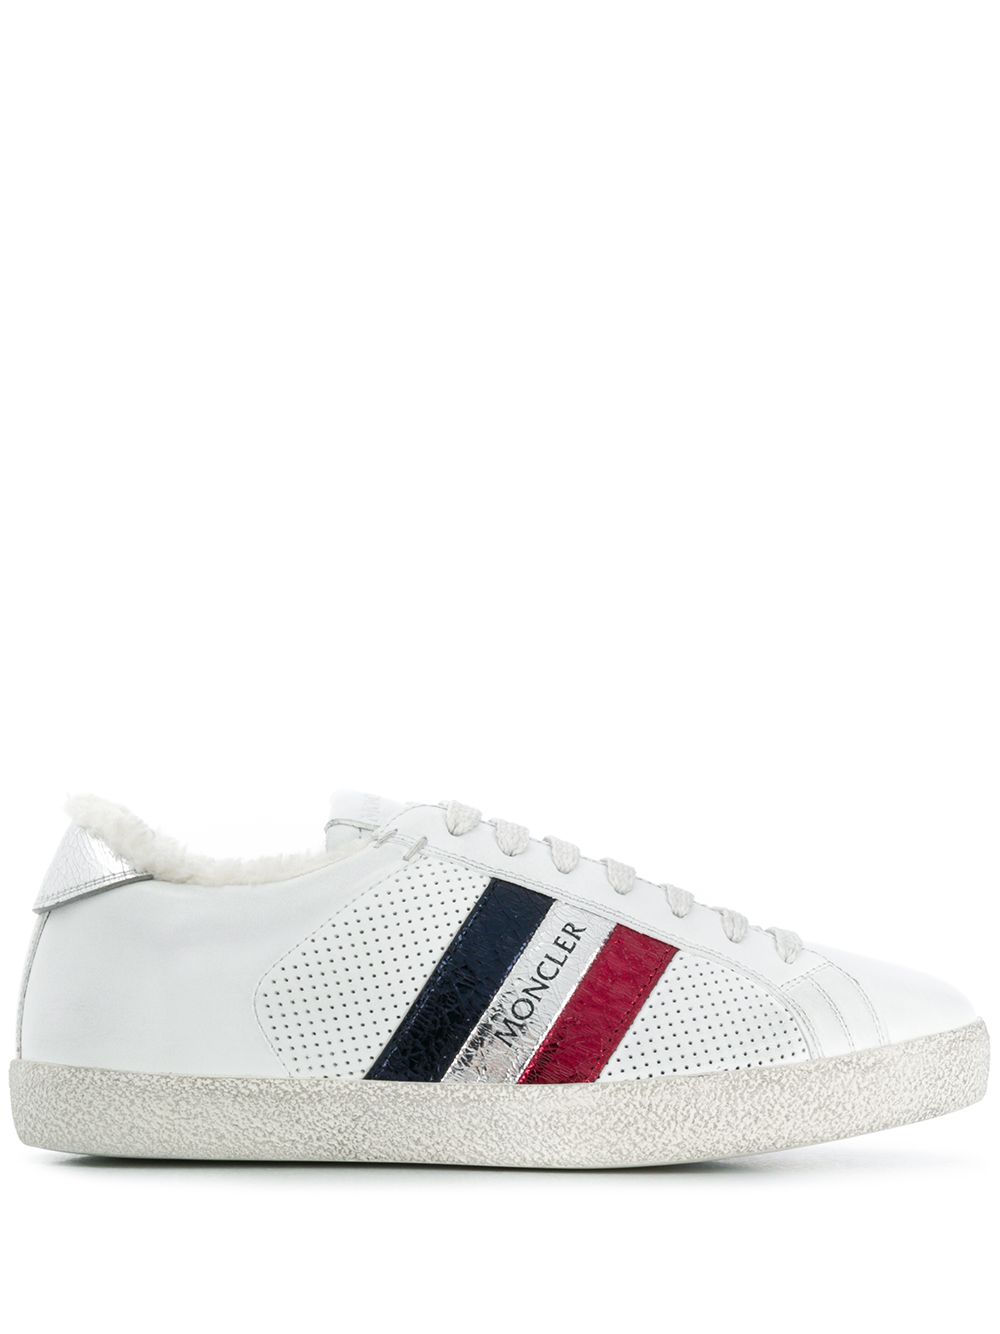 Leather Sneakers дамски обувки Moncler 846099719_36